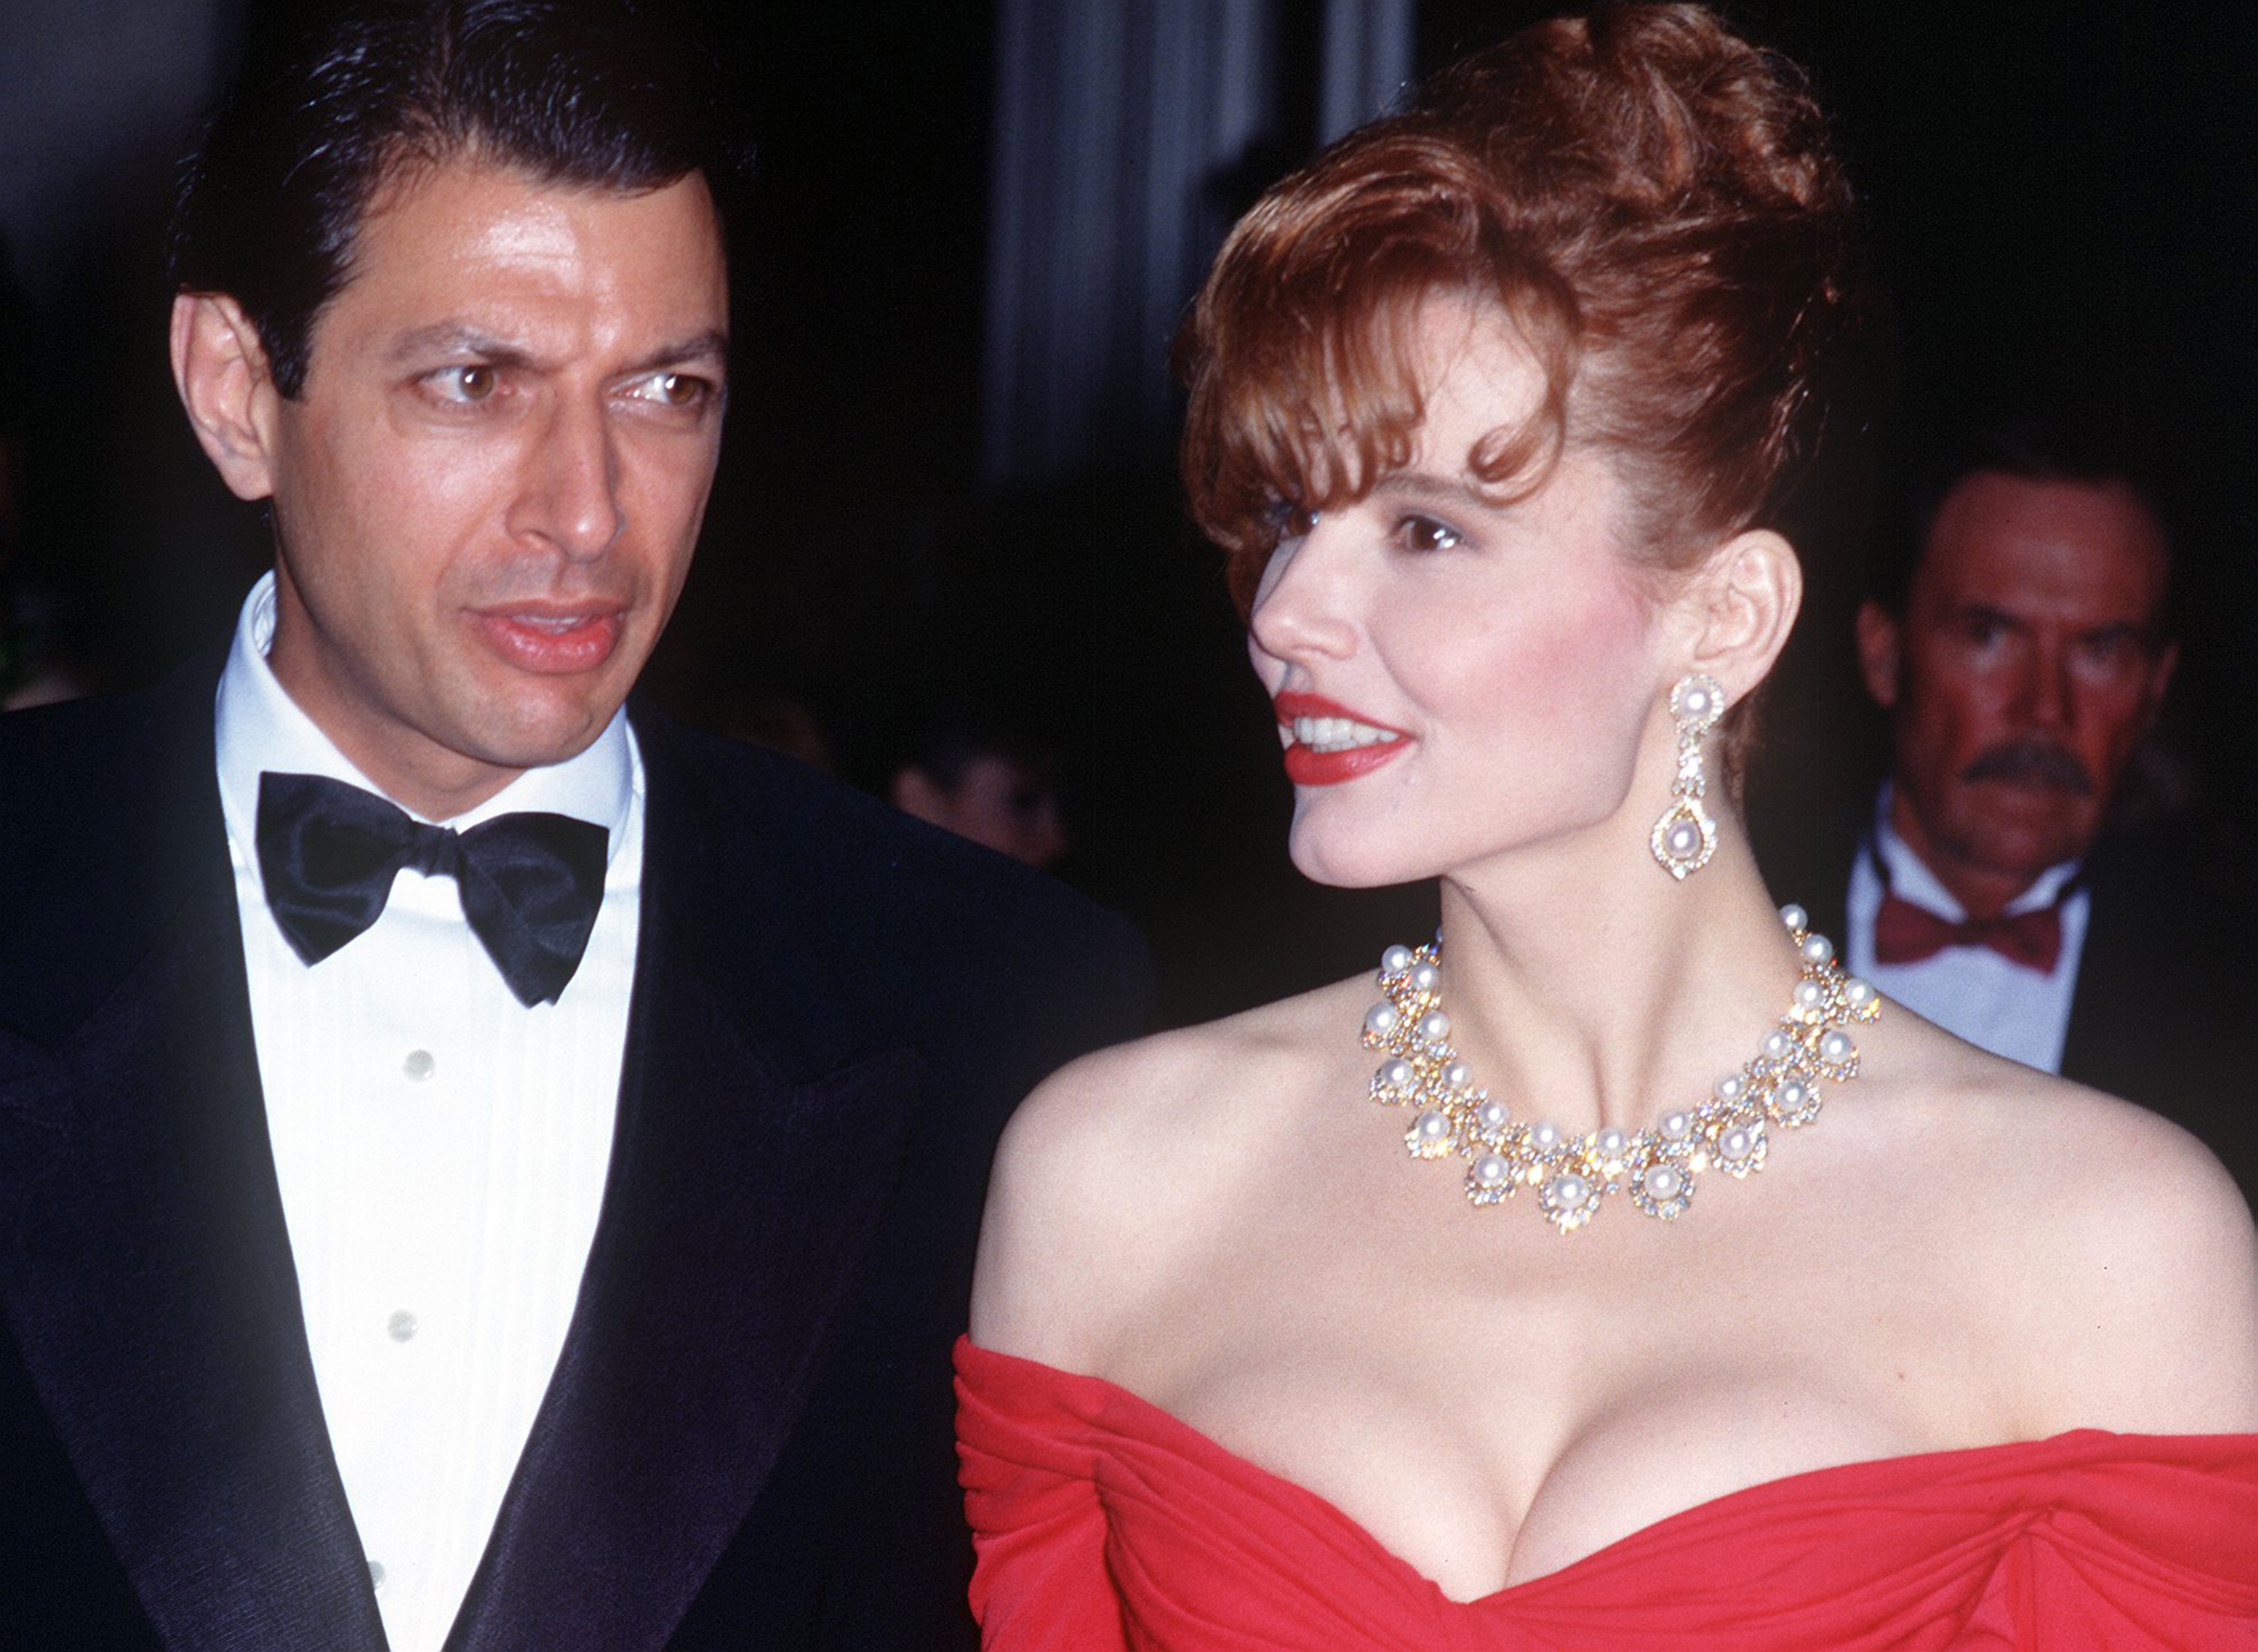 Geena Davis and Jeff Goldblum at the 62nd Annual Academy Awards on March 26, 1990 | Source: Getty Images